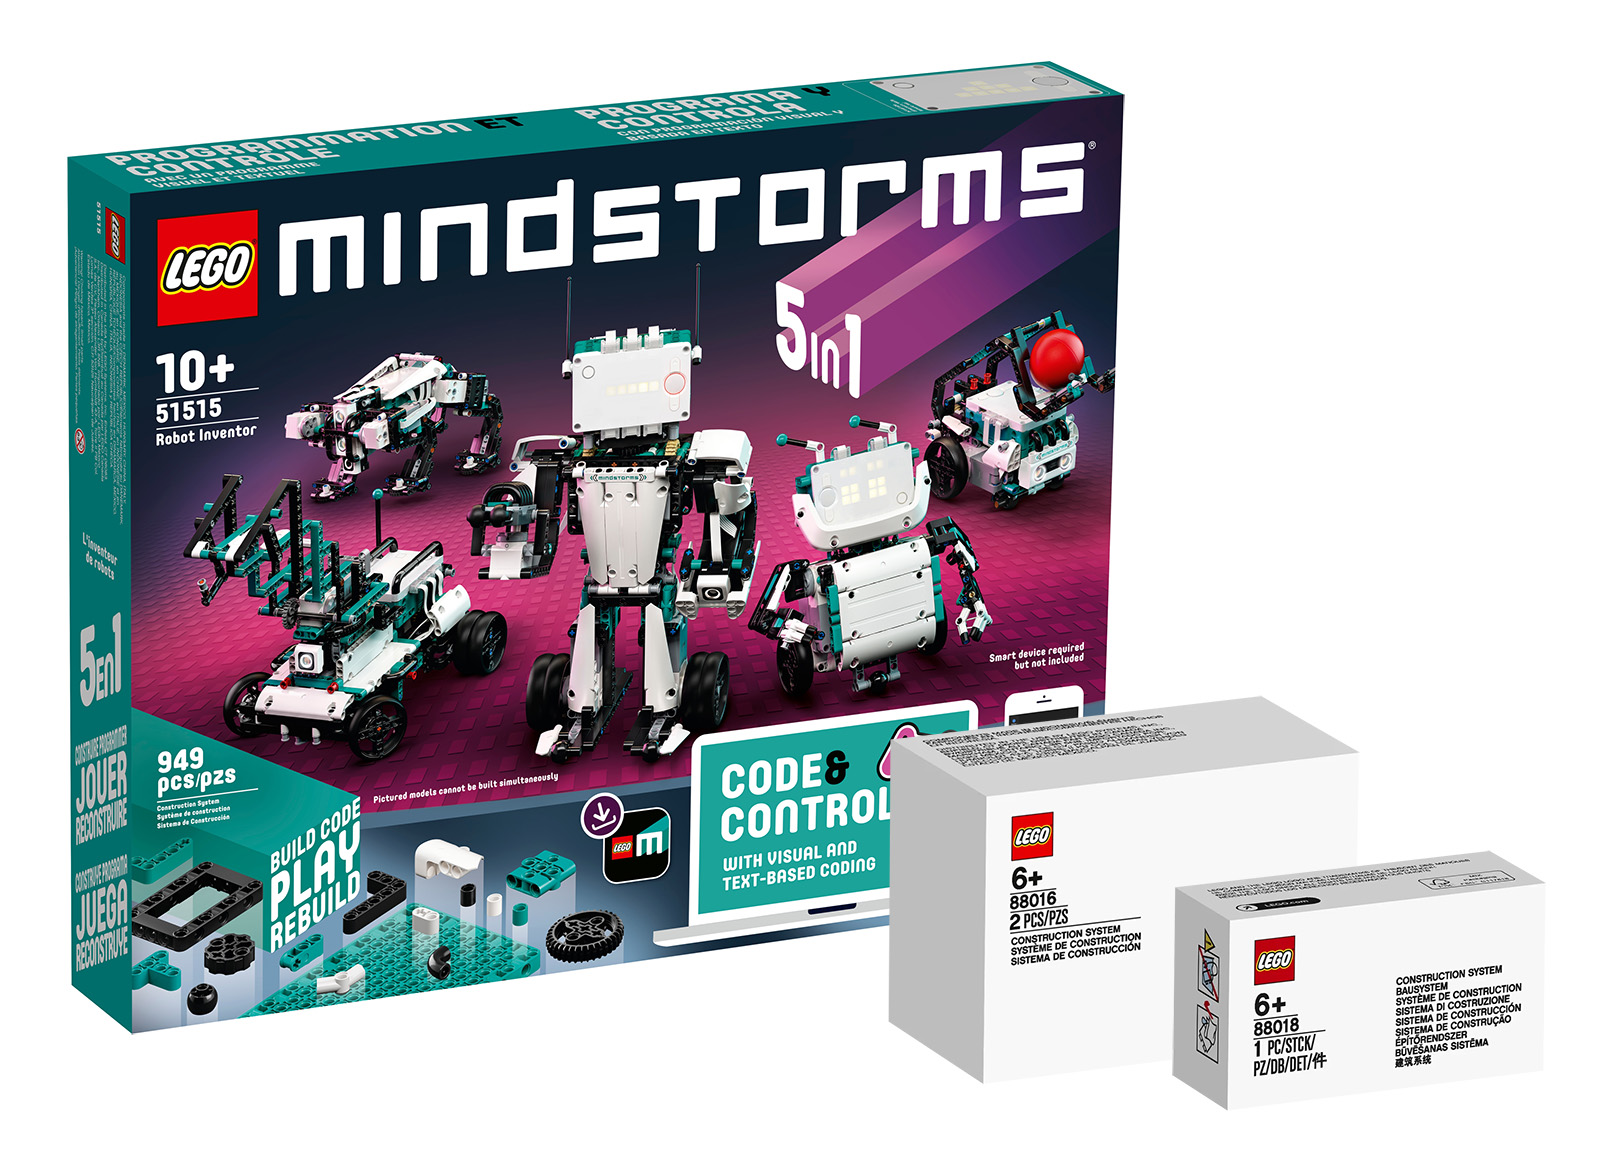 LEGO discontinuing Mindstorms brand, sunsetting 51515 Robot Inventor at end  of 2022 [News] - The Brothers Brick